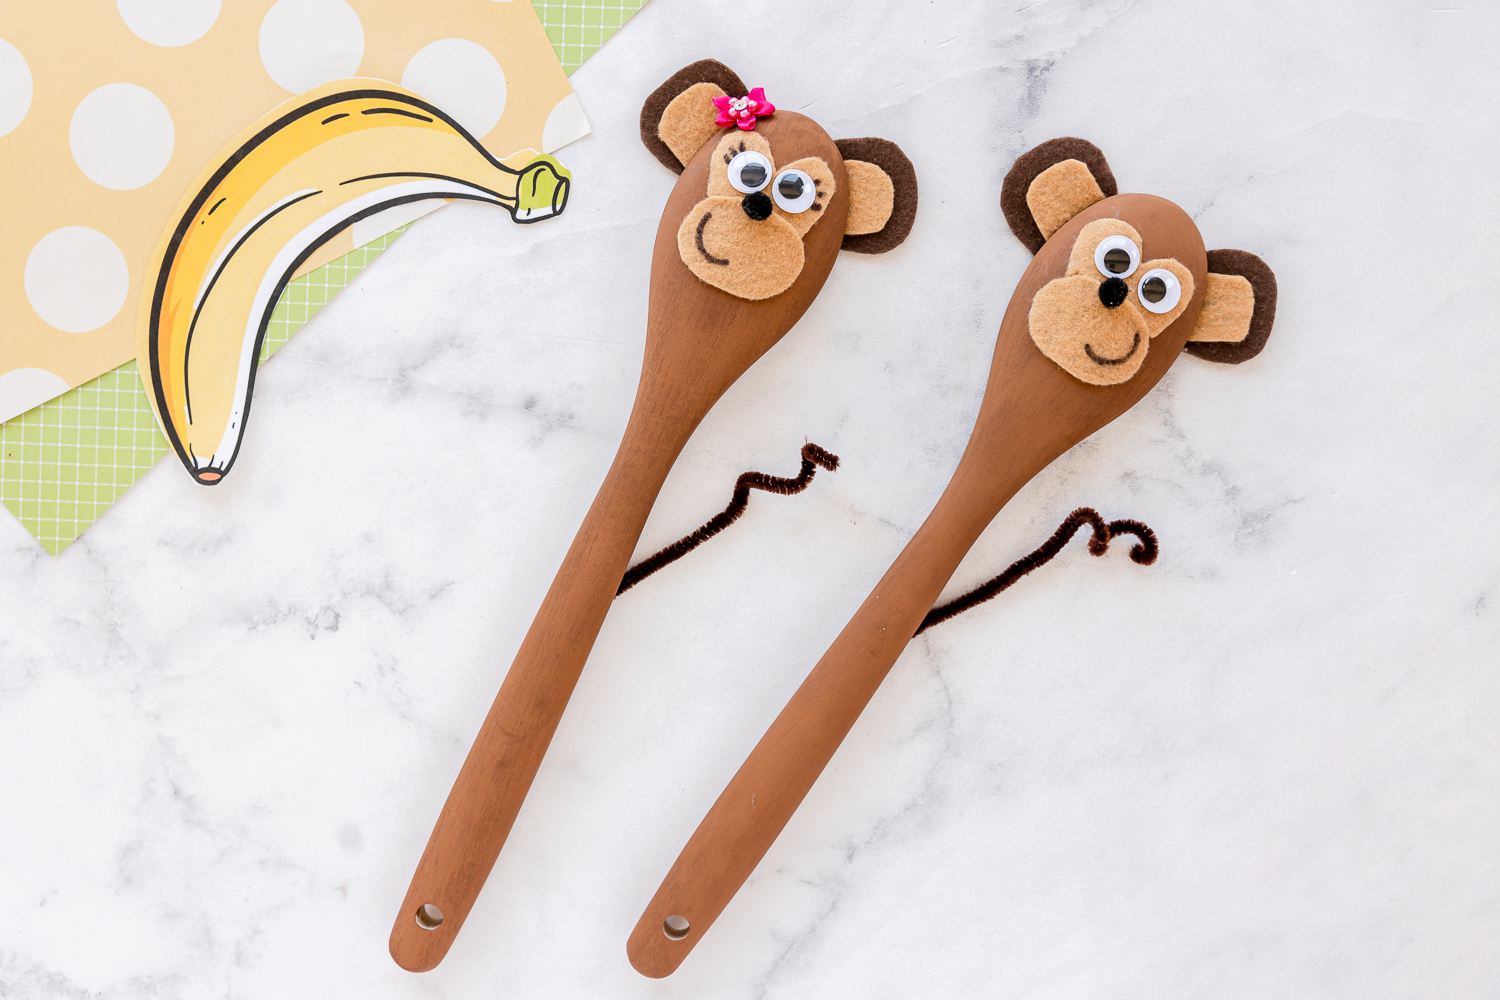 This monkey wooden spoon craft is a fun way to give some wooden spoons new life! Kids will enjoy making these simple monkeys - great for pretend play! 